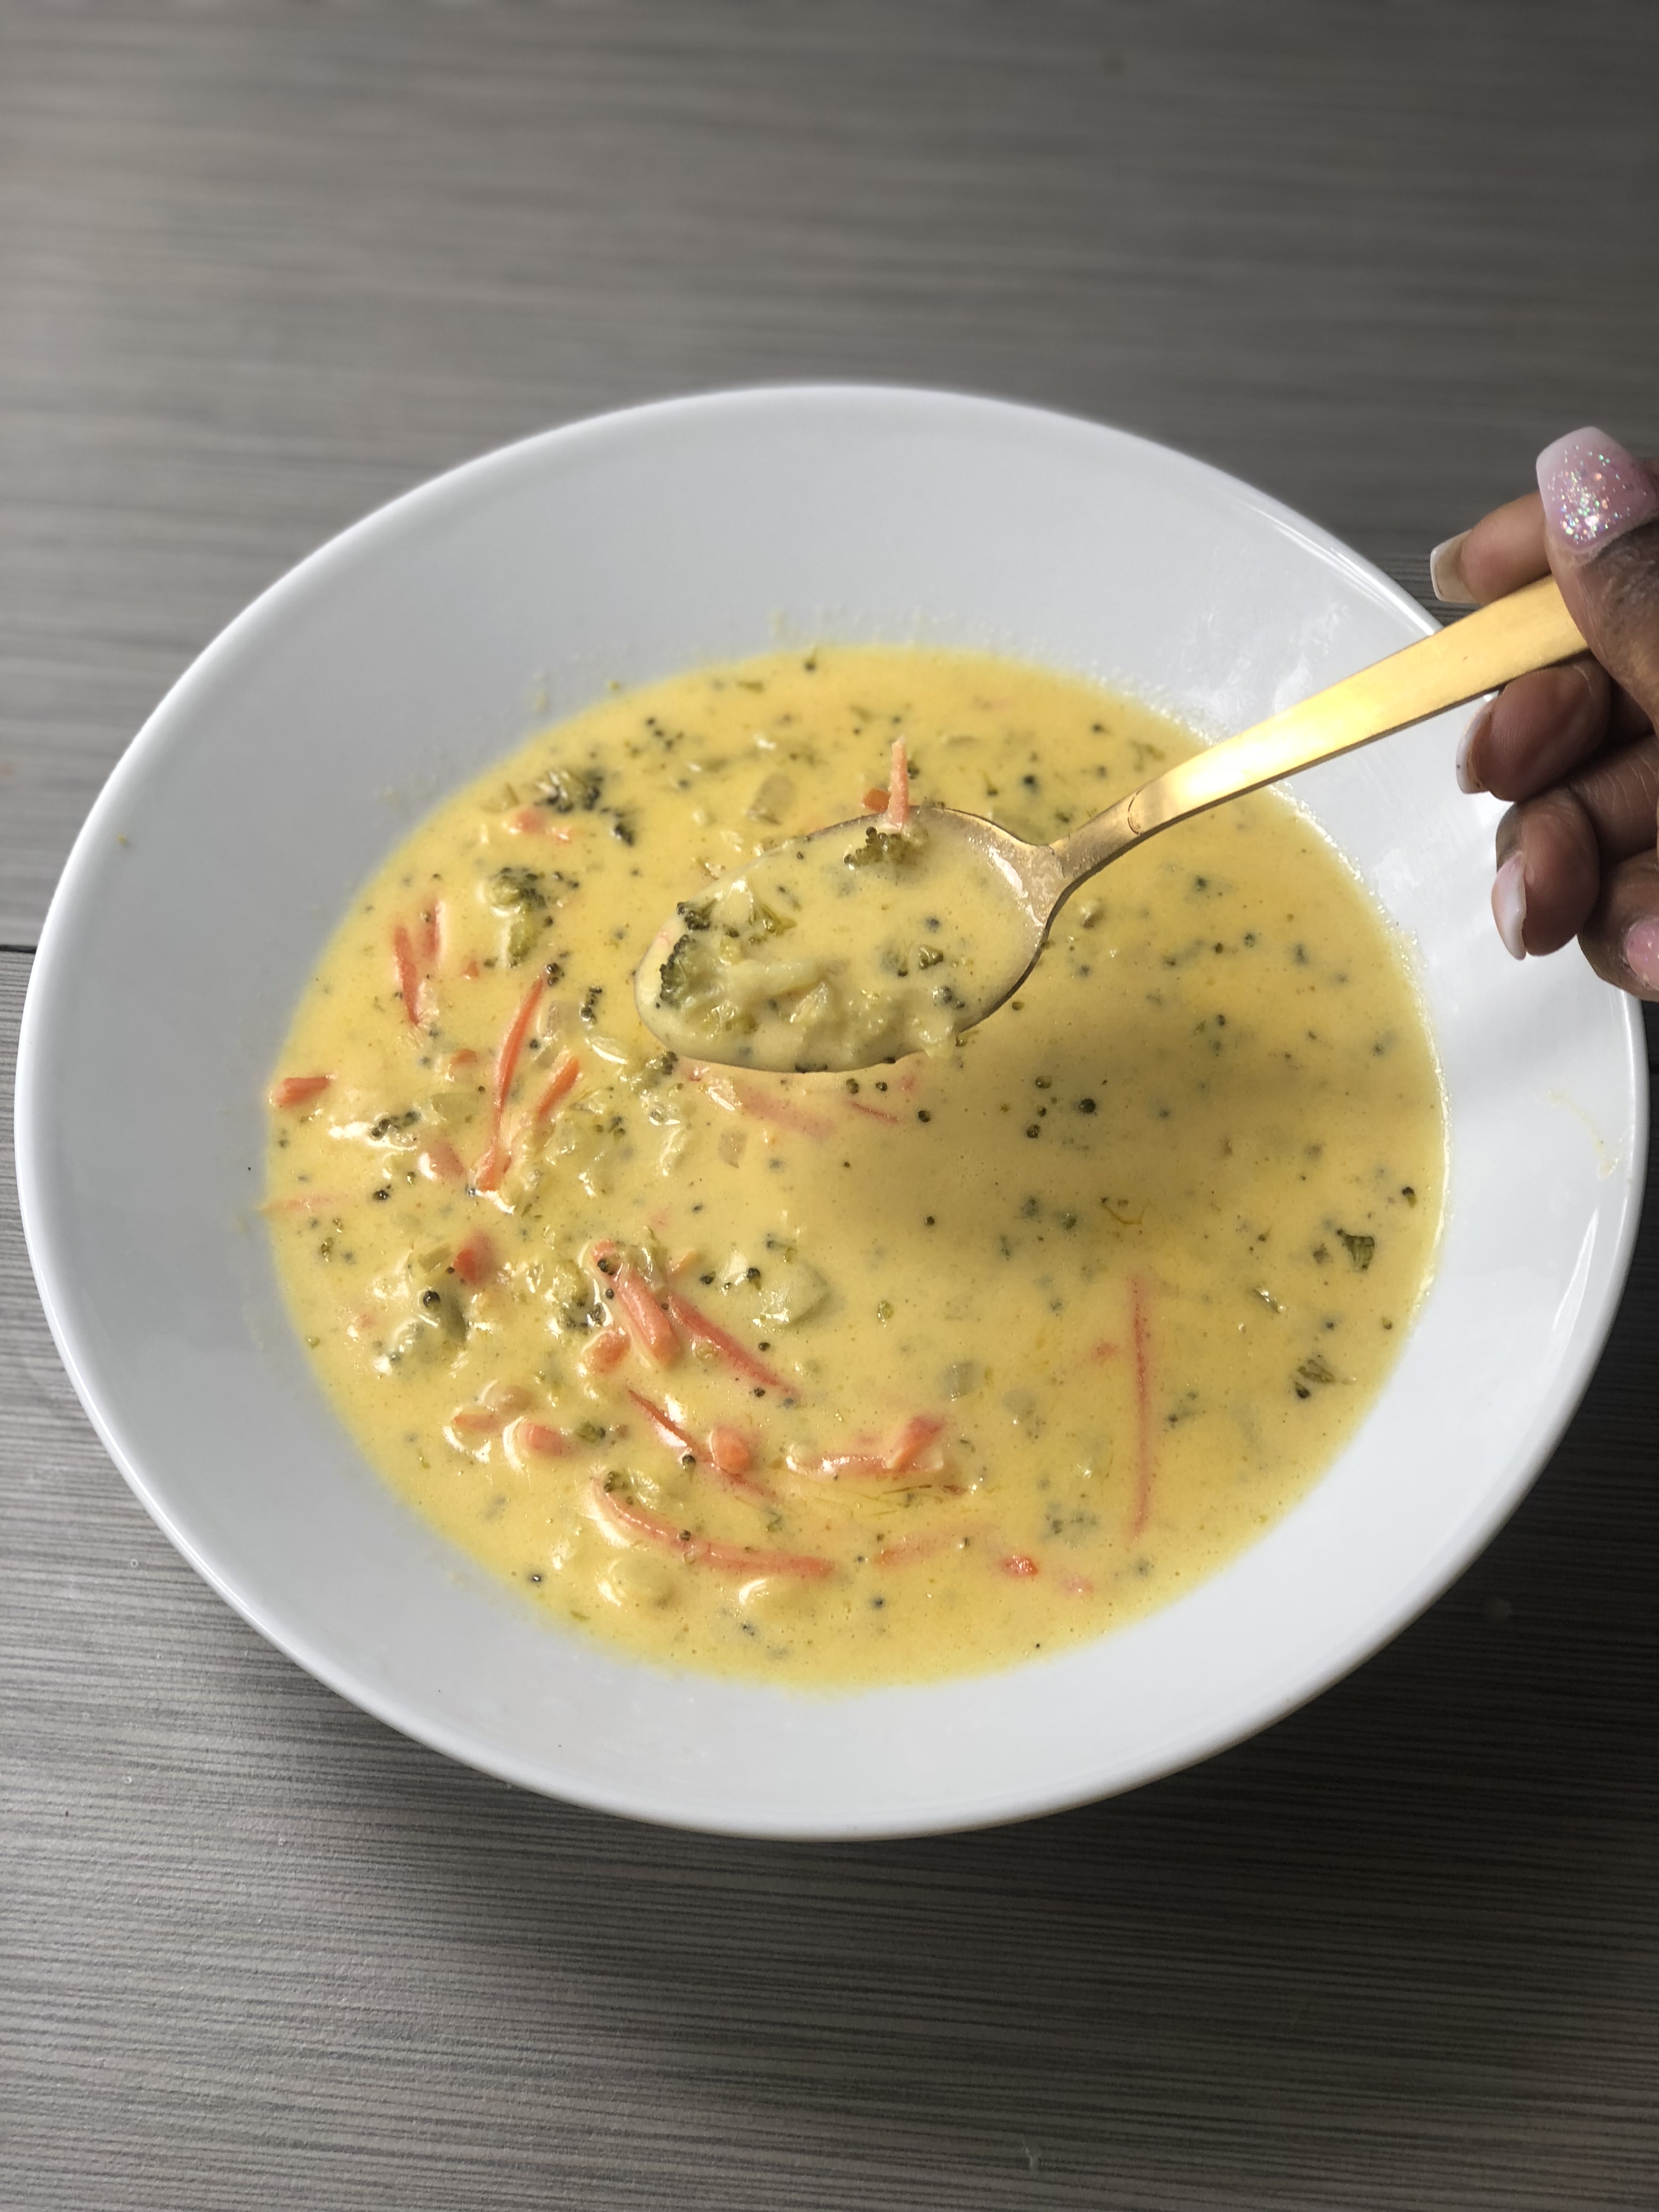 A bowl of broccoli cheddar soup and a golden spoon.